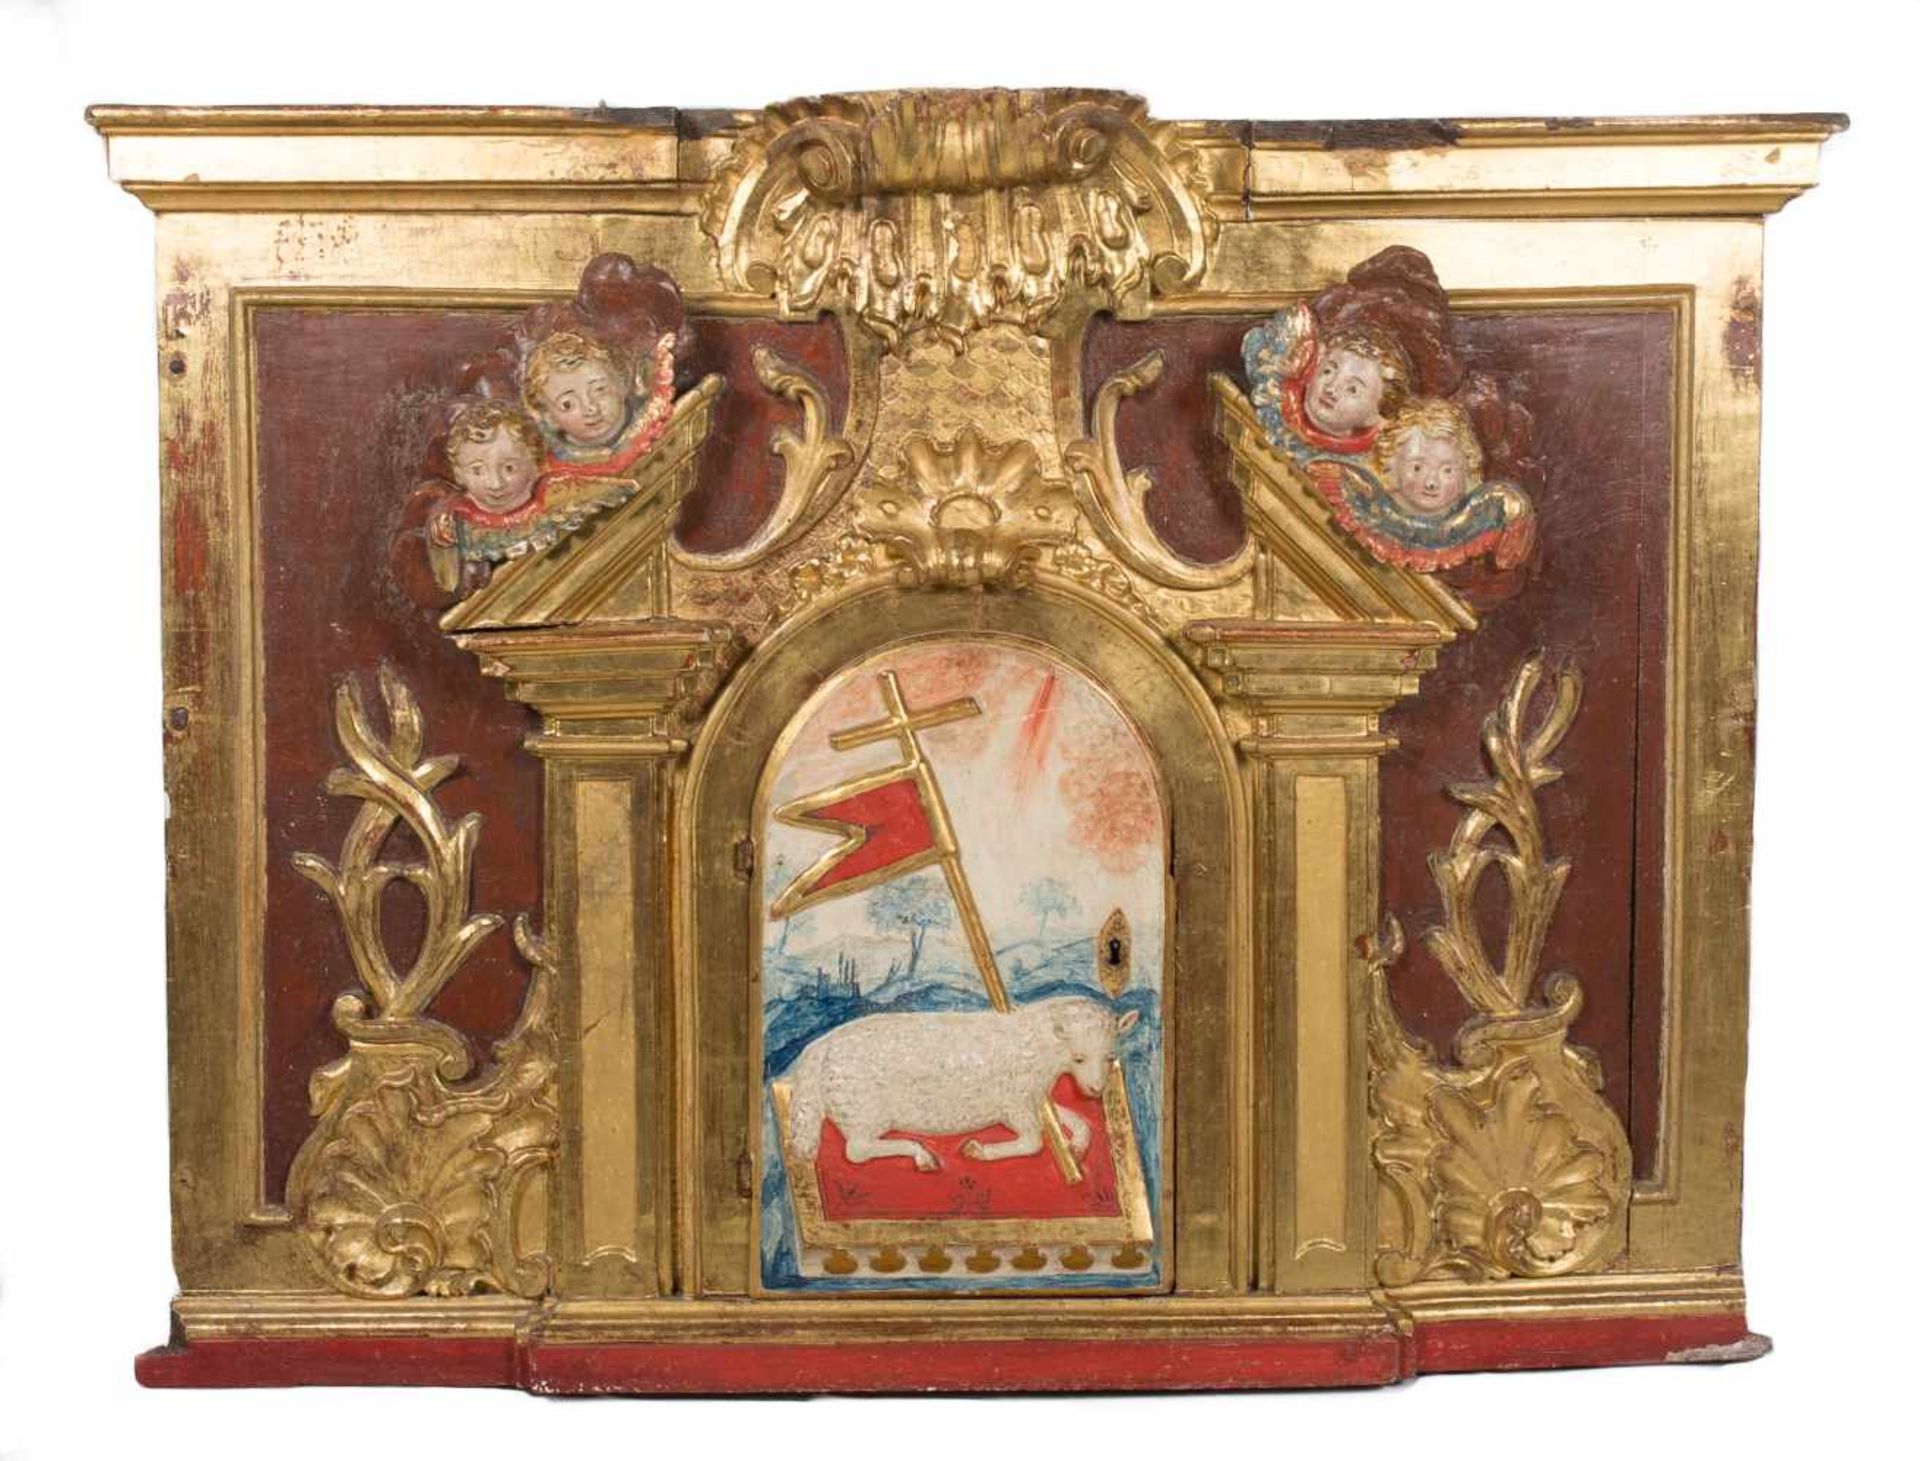 Part of an altarpiece which includes the carved, gilded and polychromed door to the tabernacle.